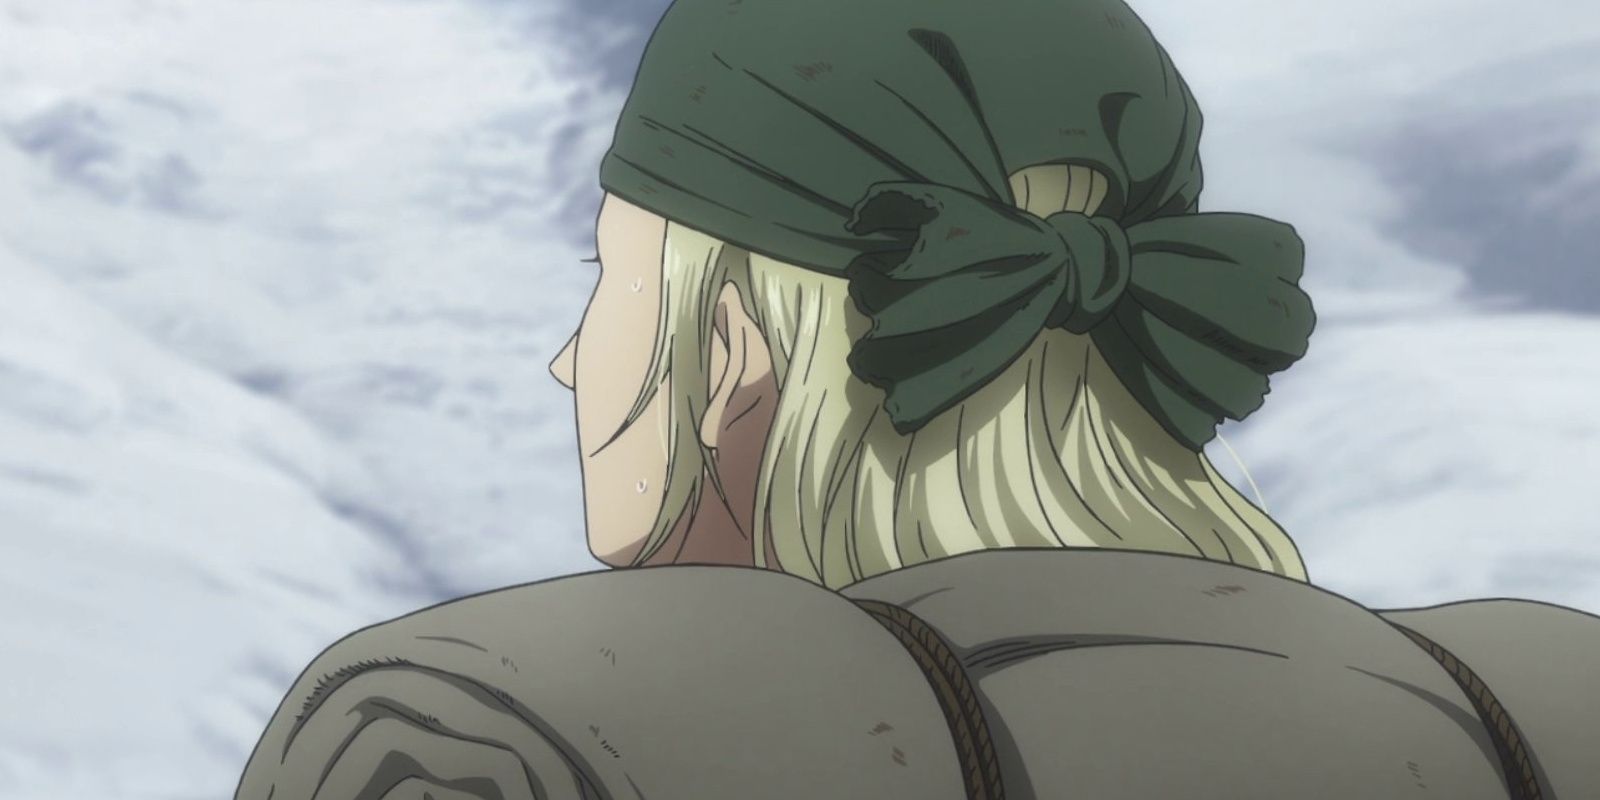 Hilde preview in the vinland saga anime